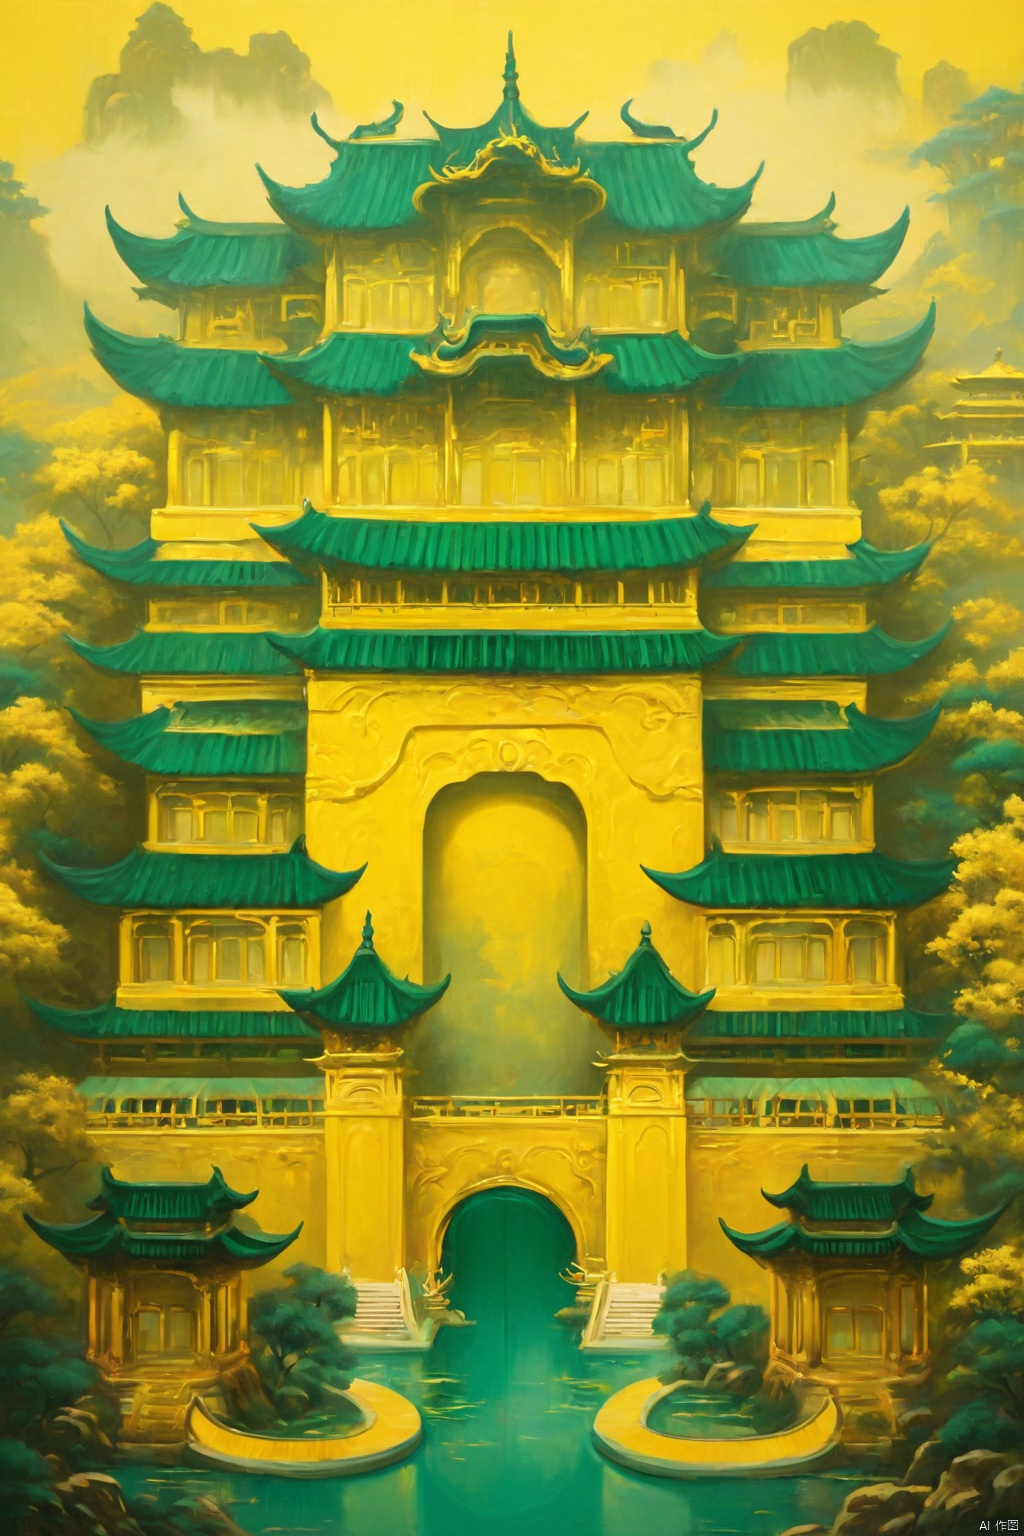 palace story by xelo hun, in the style of yellow and emerald, precise, detailed architecture paintings, mid-century, chinapunk, mesmerizing colorscapes, textural harmony, realistic detail